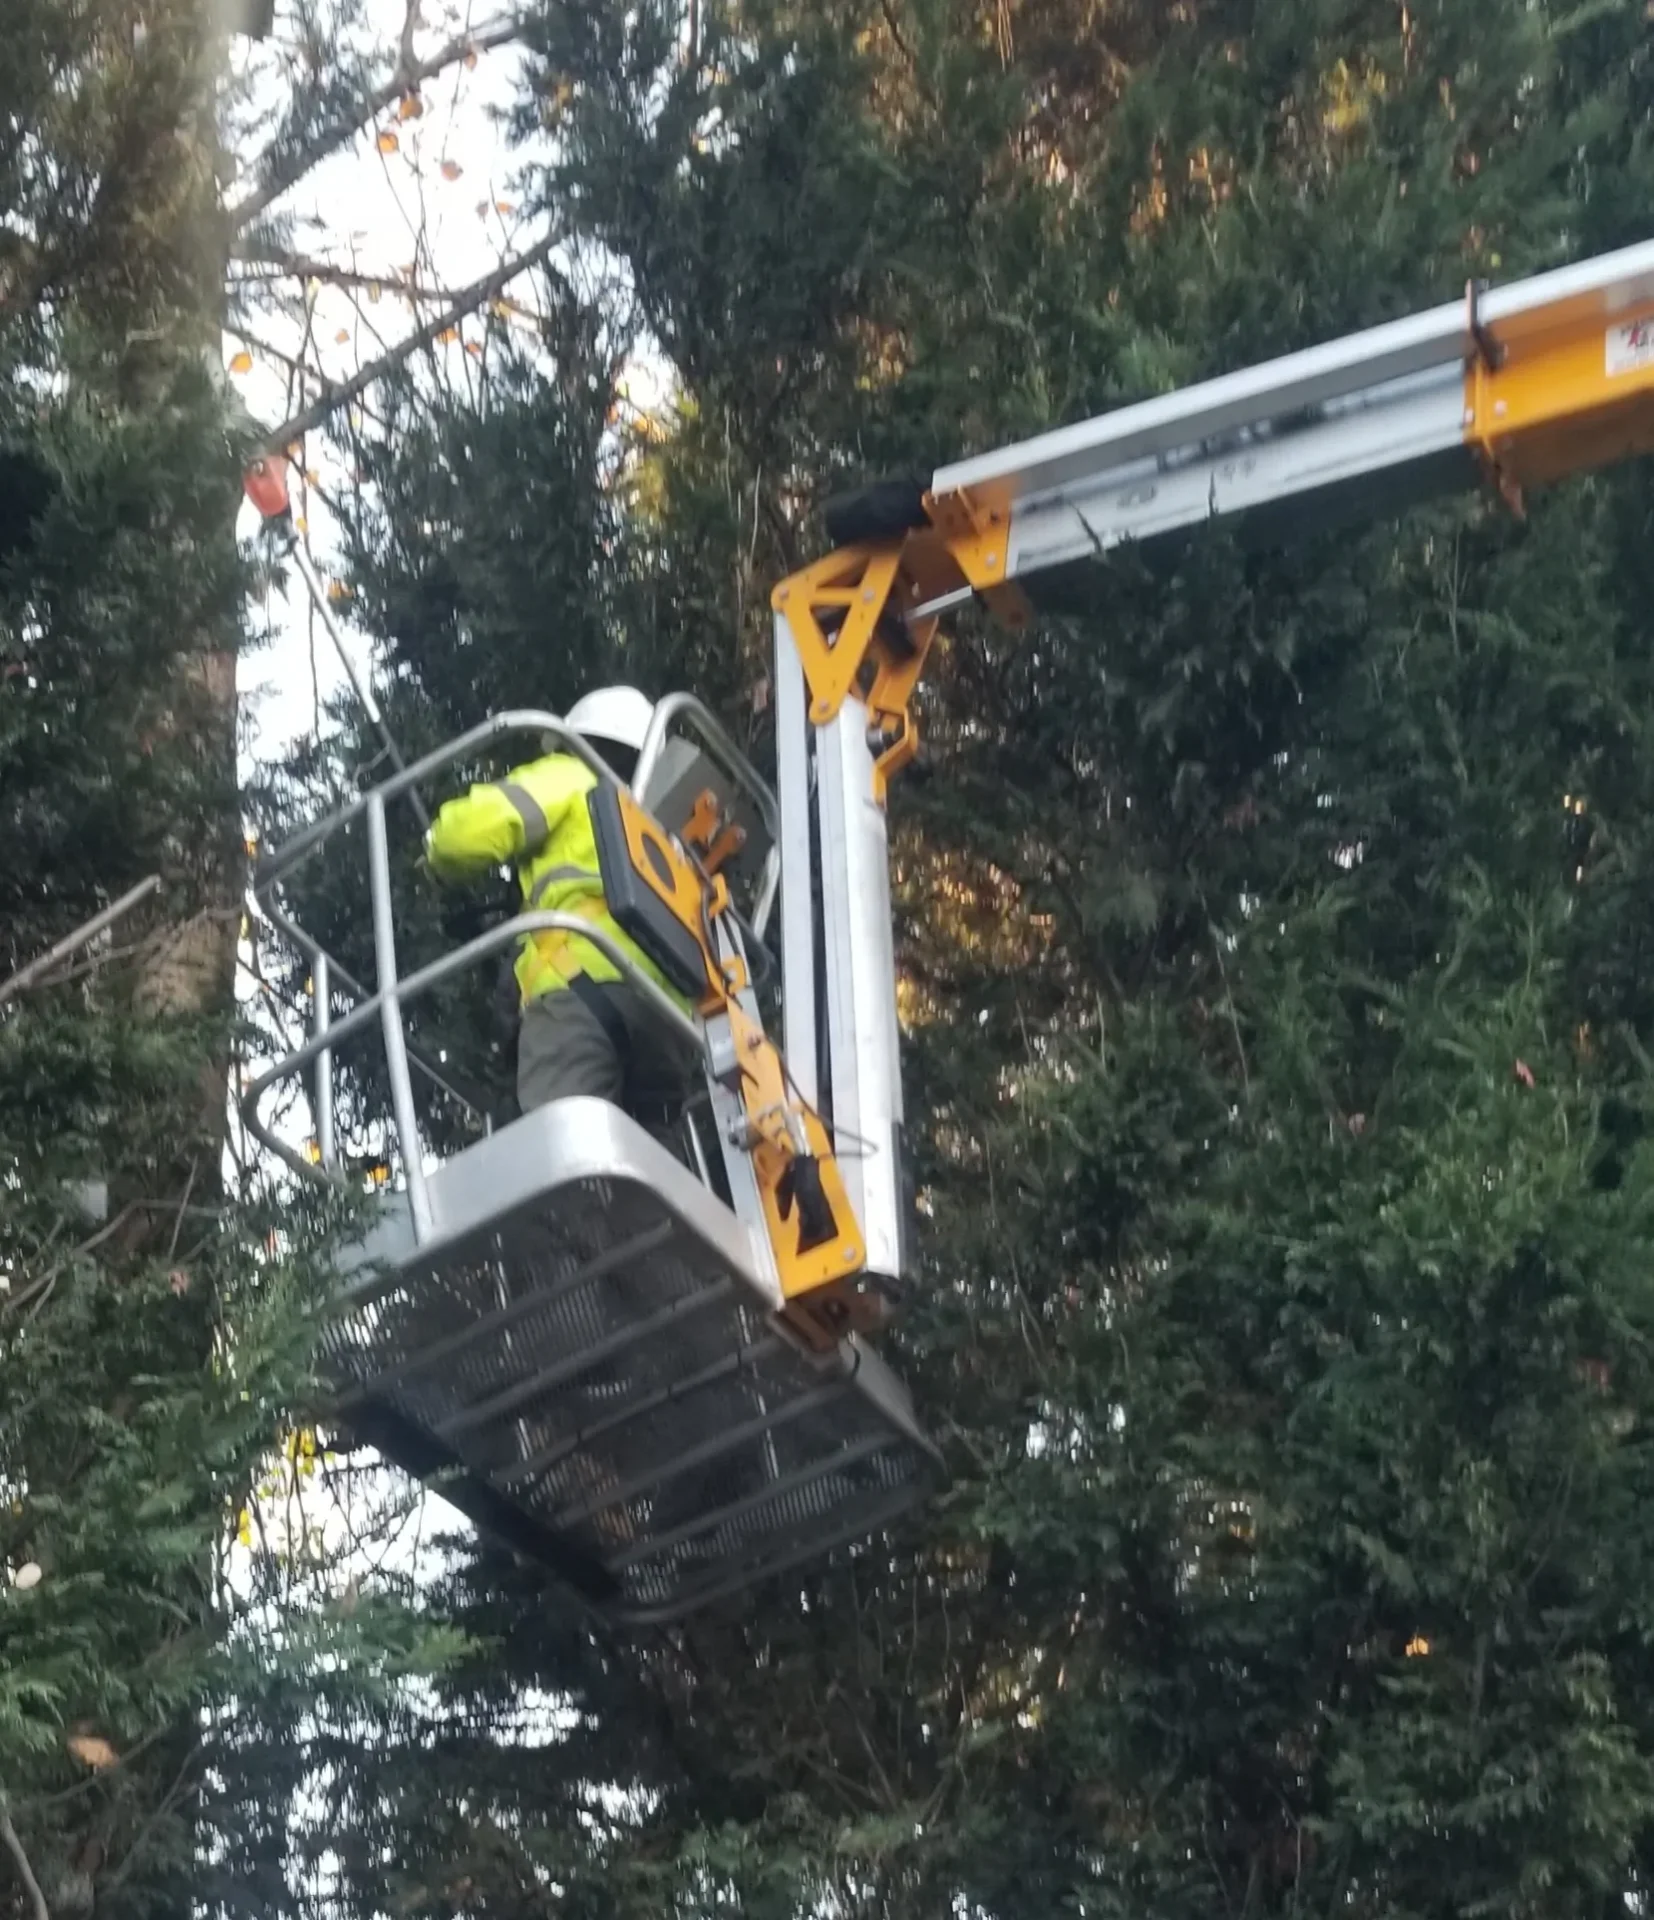 A man in a cherry picker working on trees.